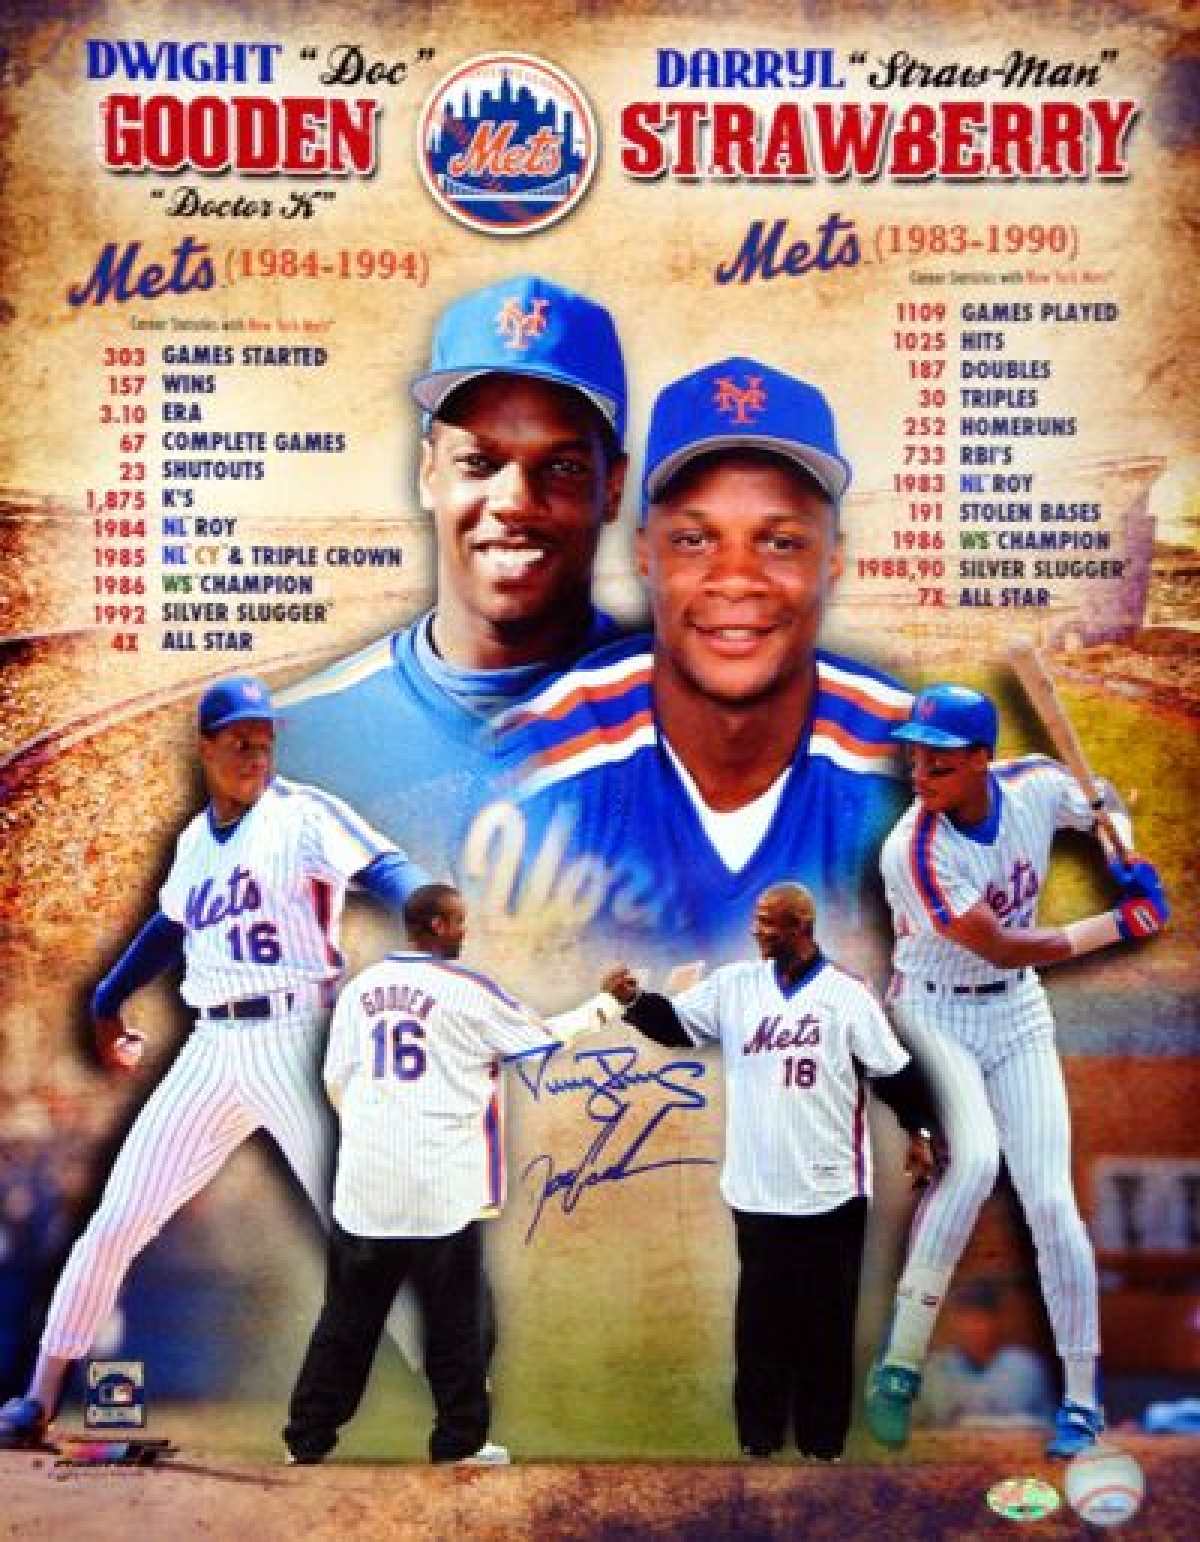 Mets to retire numbers of Darryl Strawberry, Doc Gooden